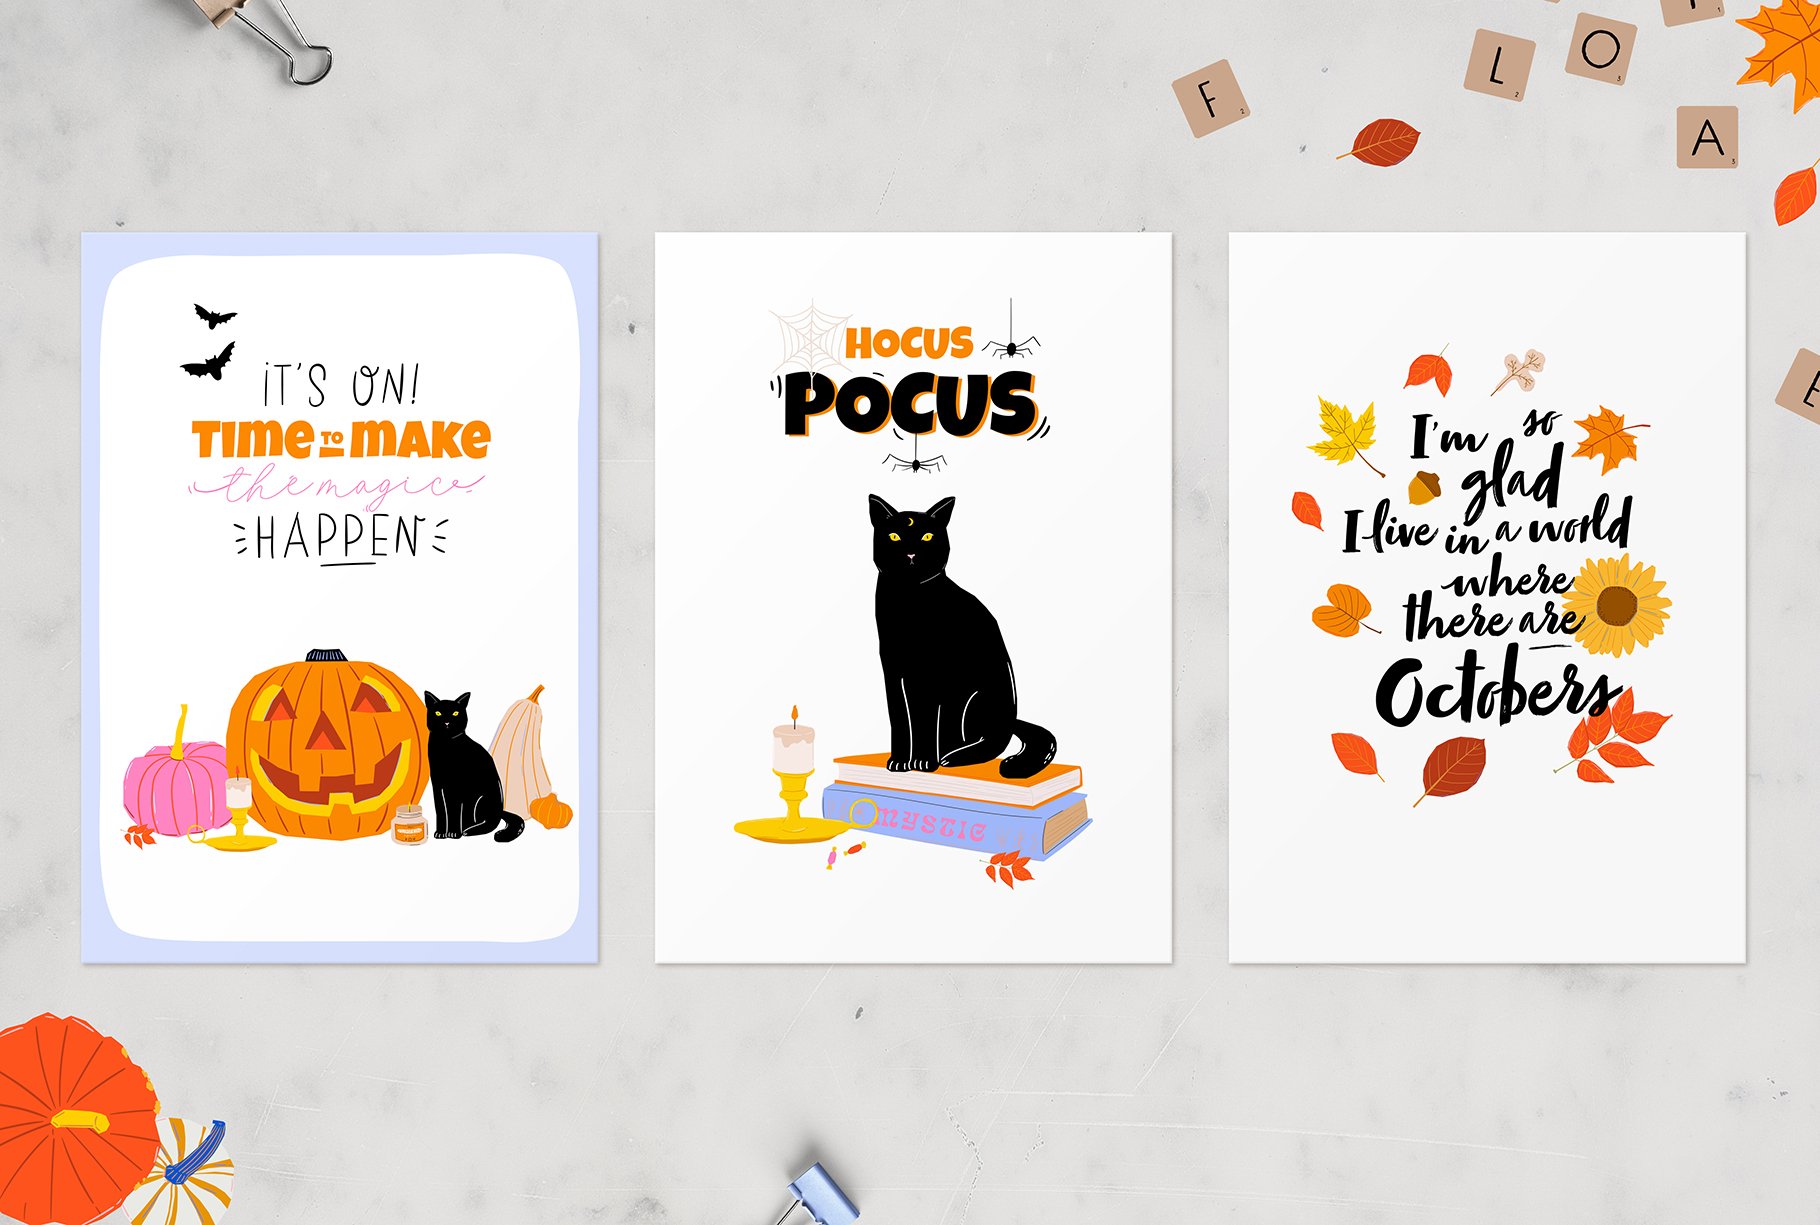 Halloween cards with minimalistic designs.